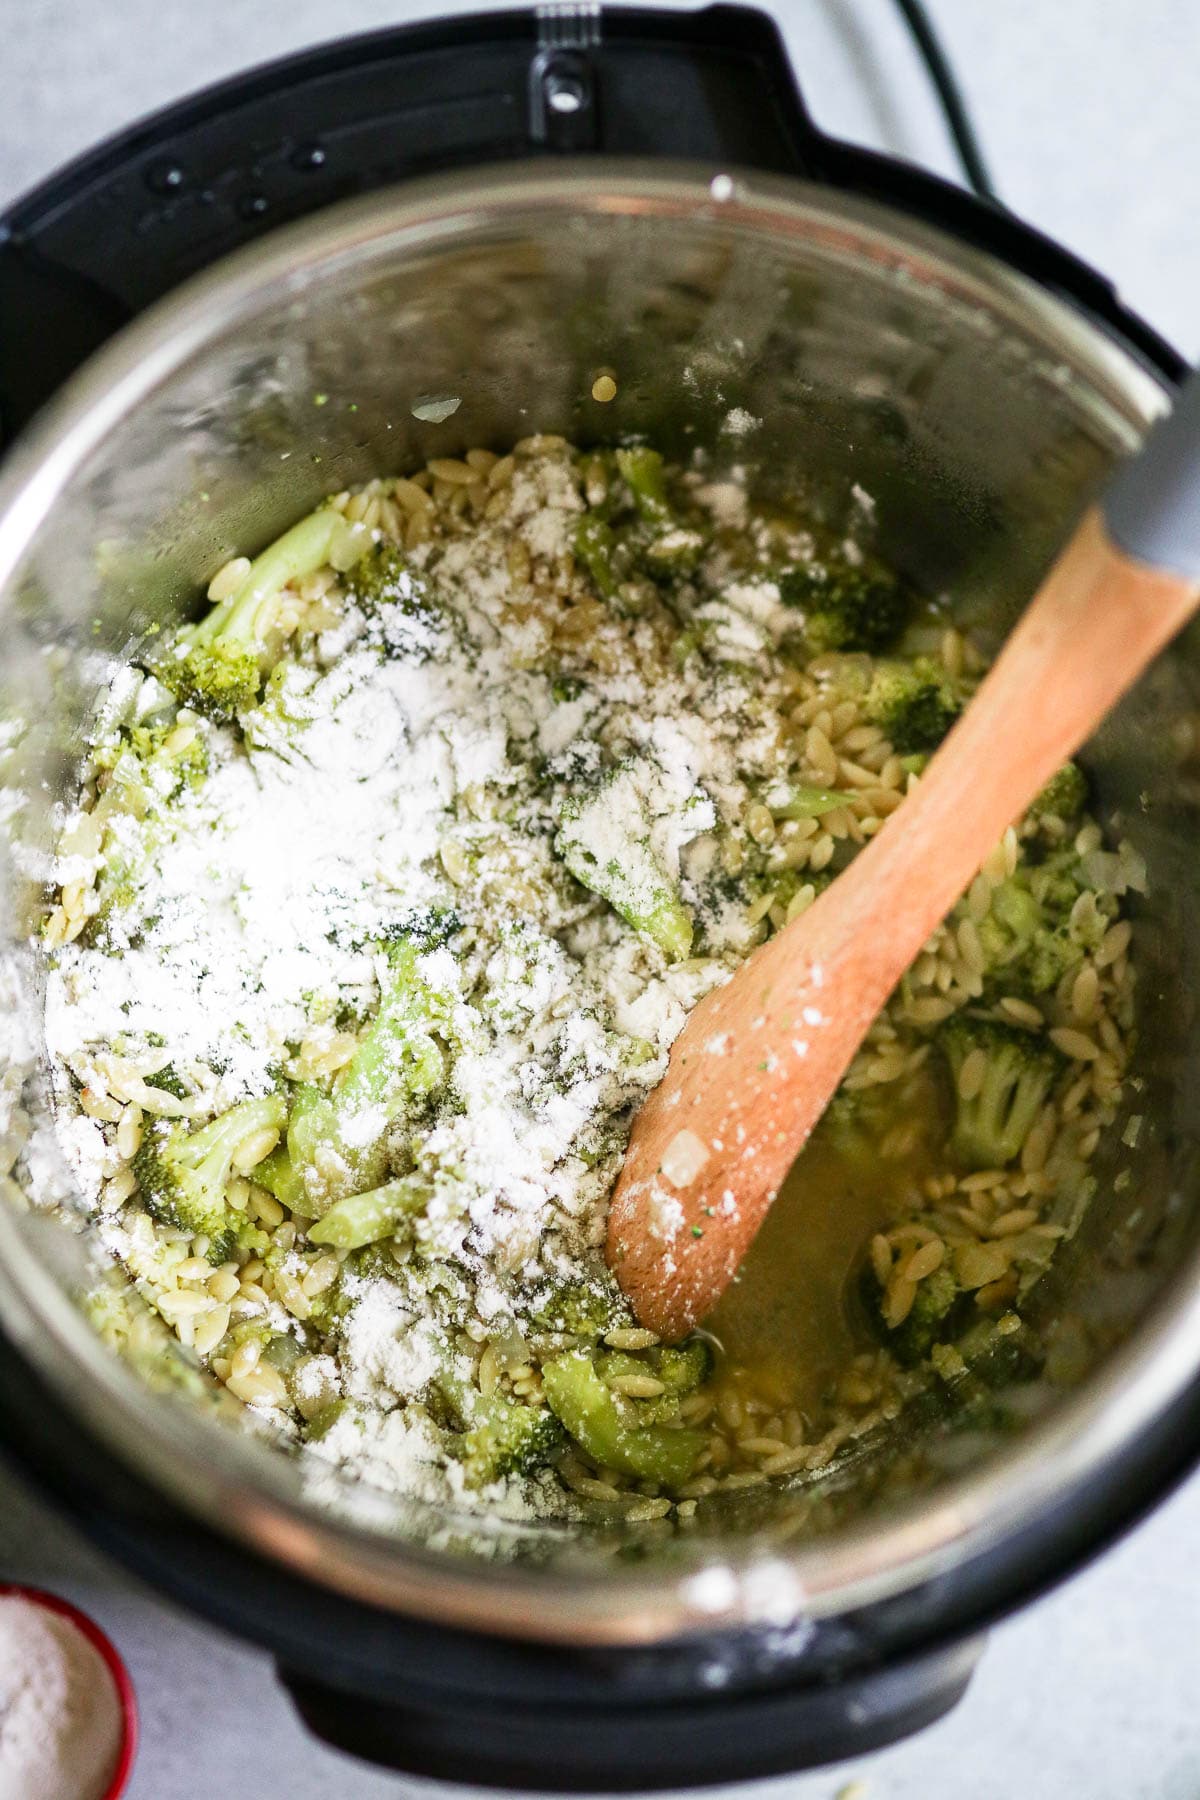 photo of cooked broccoli and orzo with flour in the instant pot